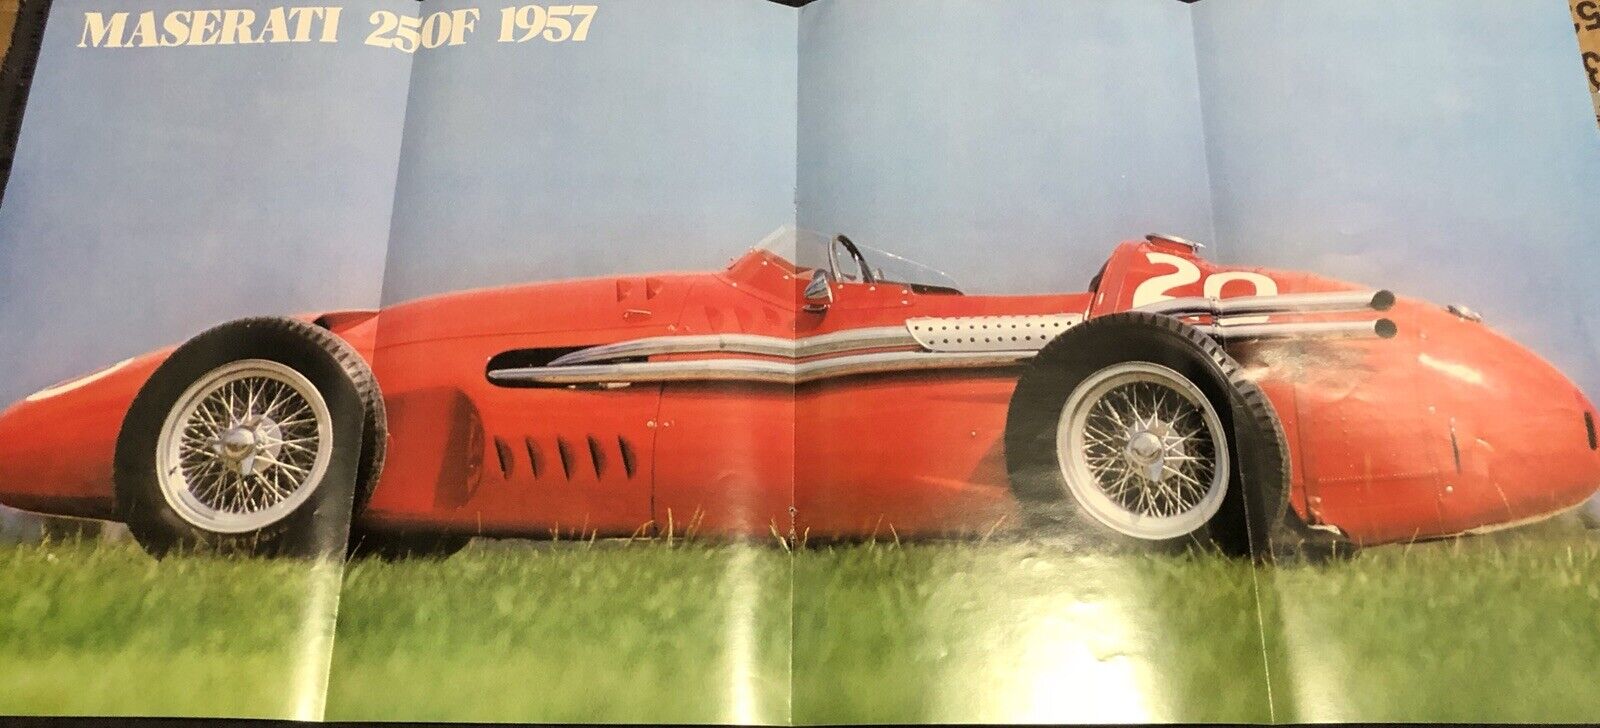 Vintage 1957 Maserati 250F Poster Brochure Rare Fold Out Advert T2 Stirling Moss